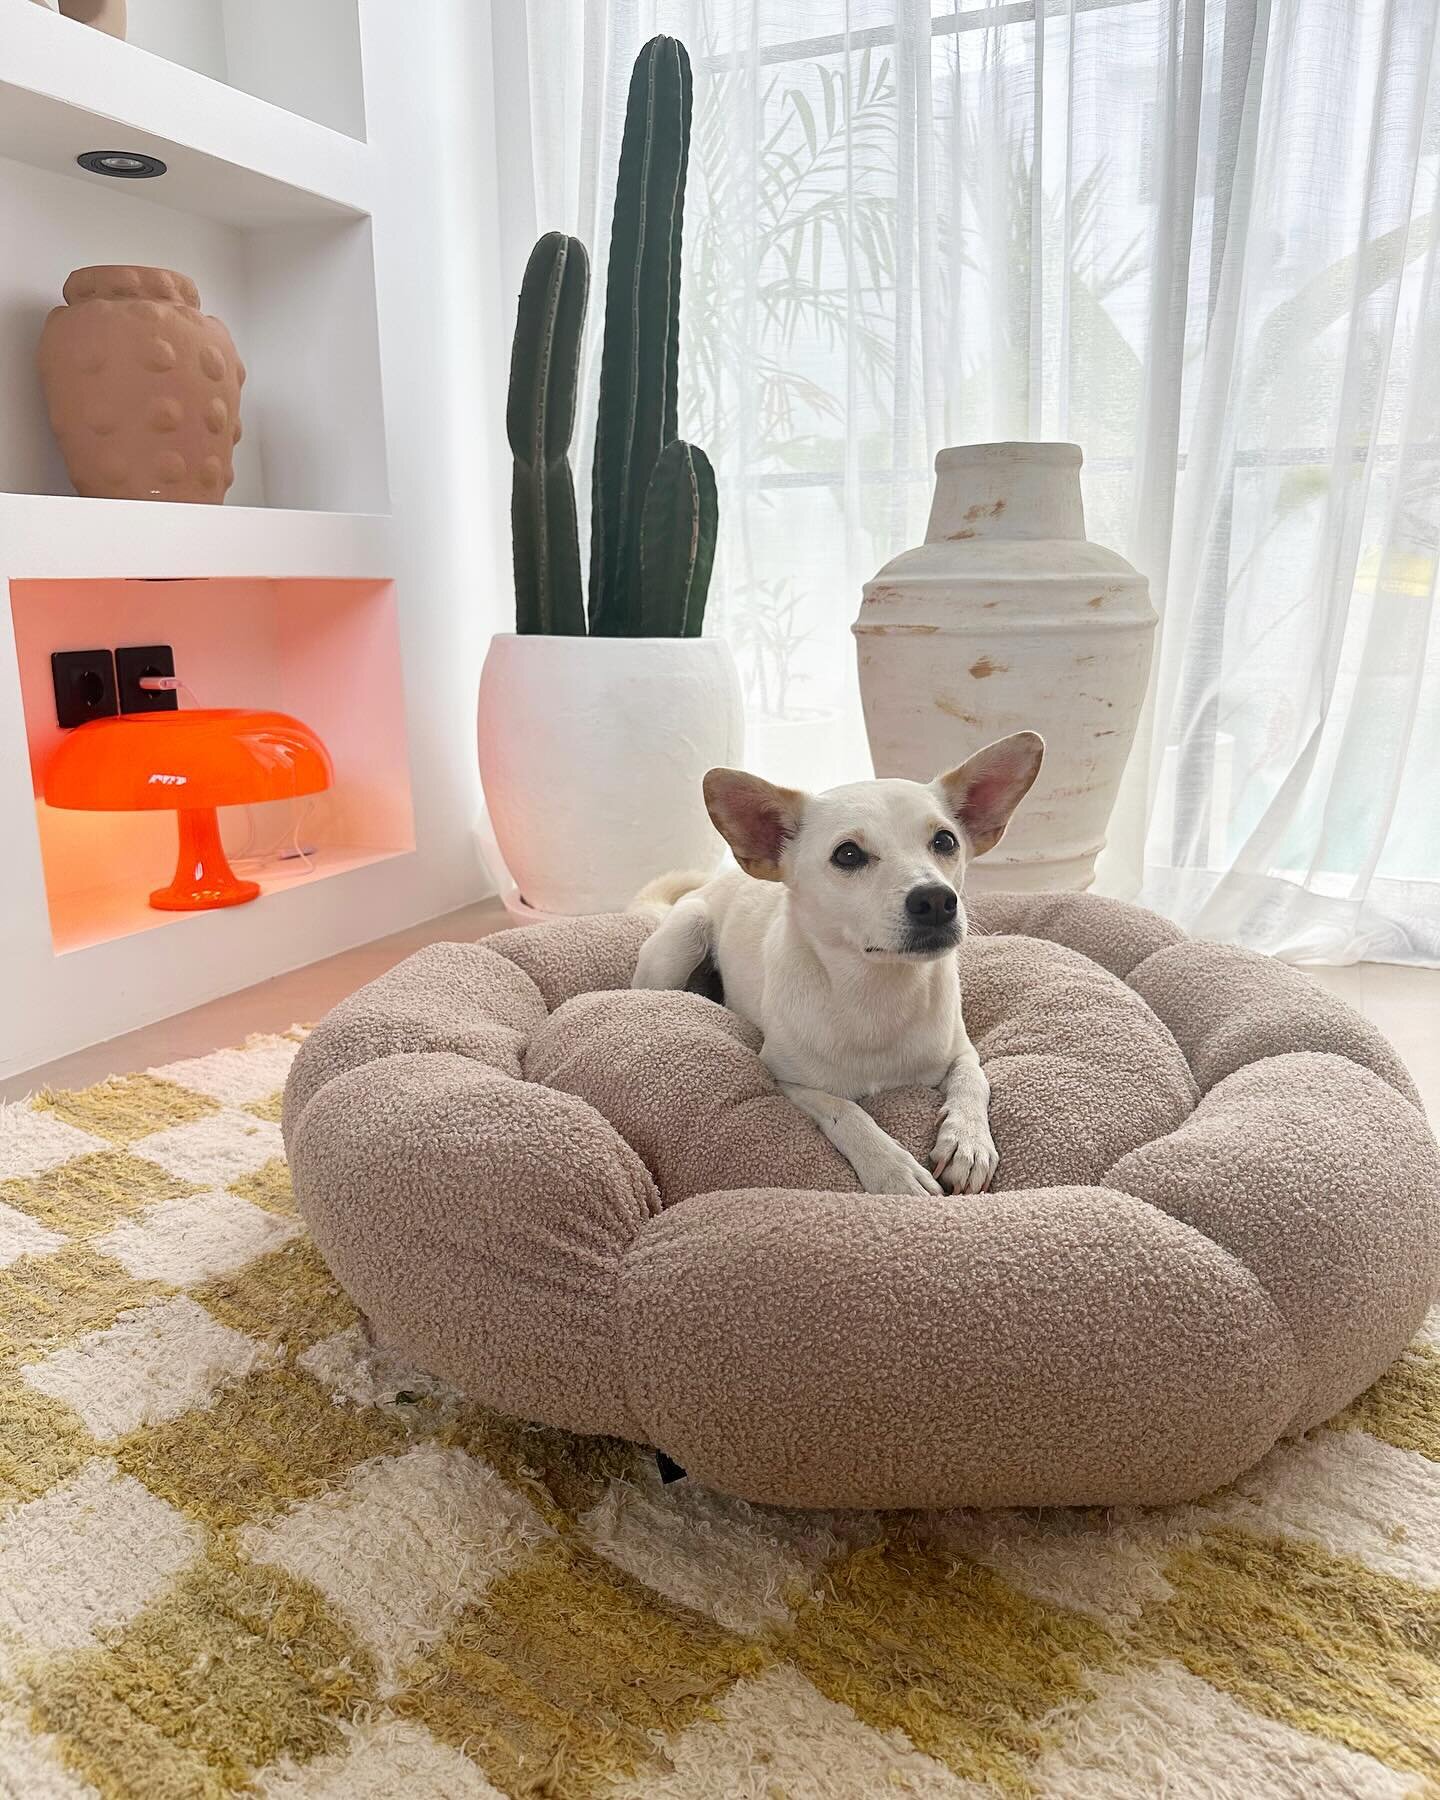 lucid OASIS bed is the perfect match for you modern minimalist ☁️

.
.
.
.
#petbed #spaniel #spanielpuppy #spanielpuppies #puppies #cutepuppies #officedogs #officepuppy #interior #interiordecor #livingroomideas #livingroominspiration #livingroomgoals